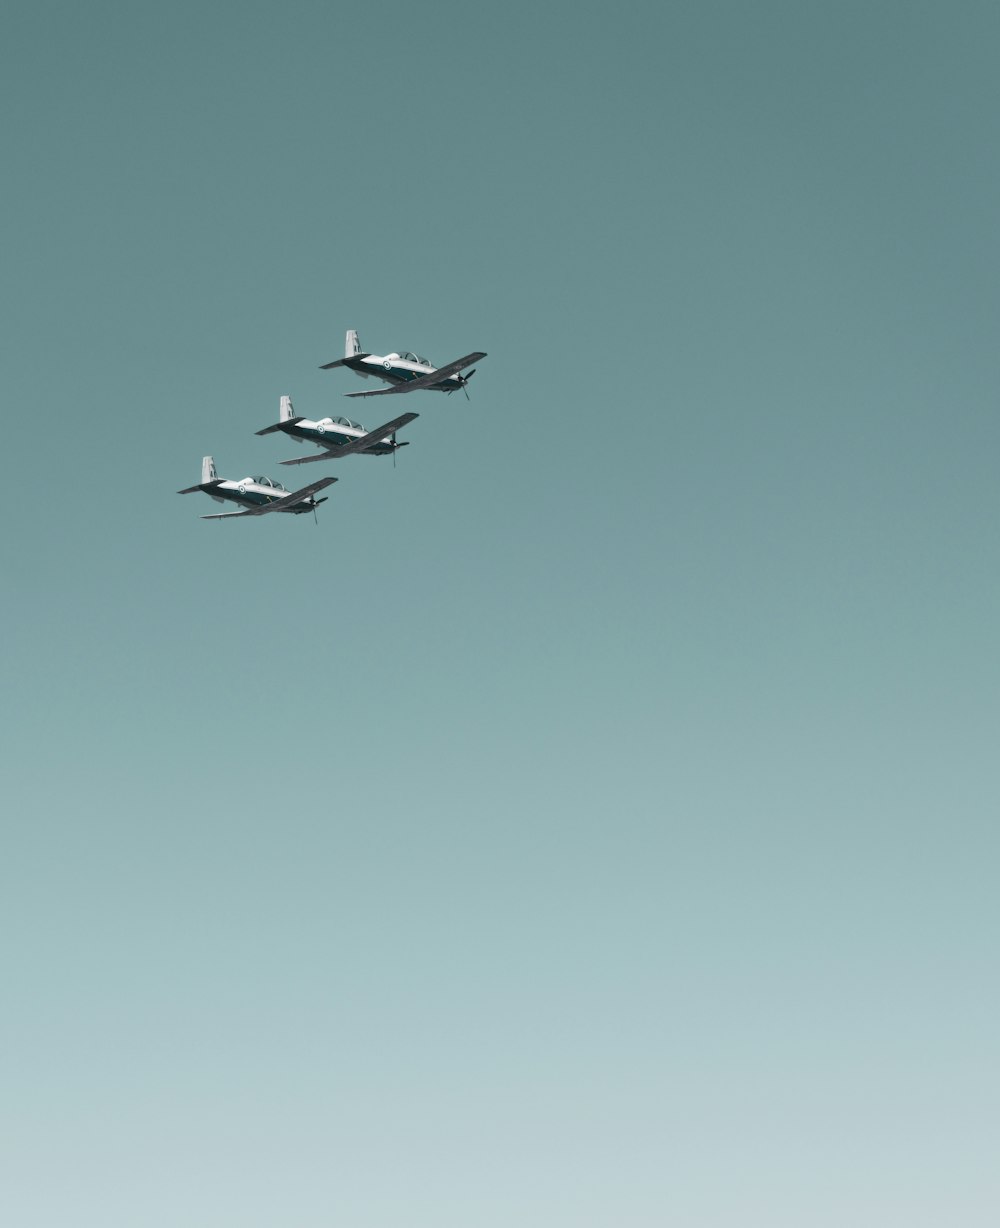 a group of four airplanes flying through a blue sky